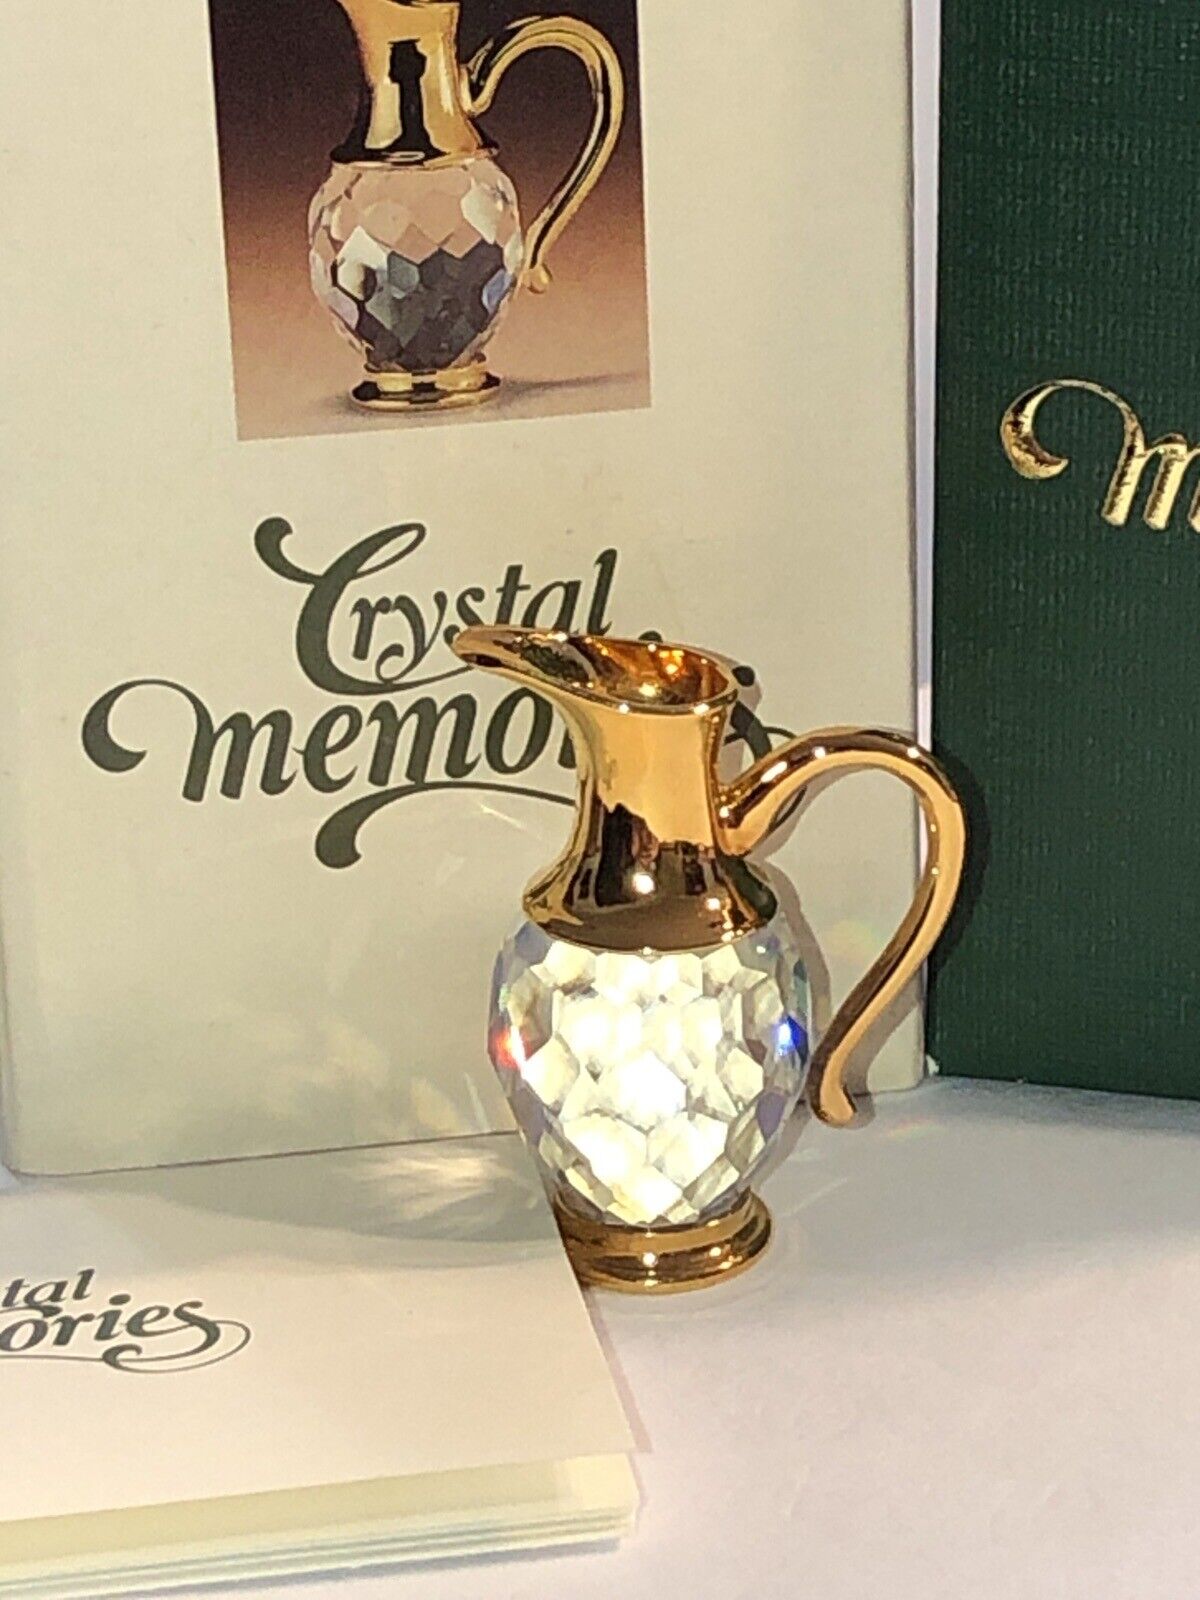 New Swarovski Crystal Memories Pitcher Decanter 9460 000 028 In Box With Cert